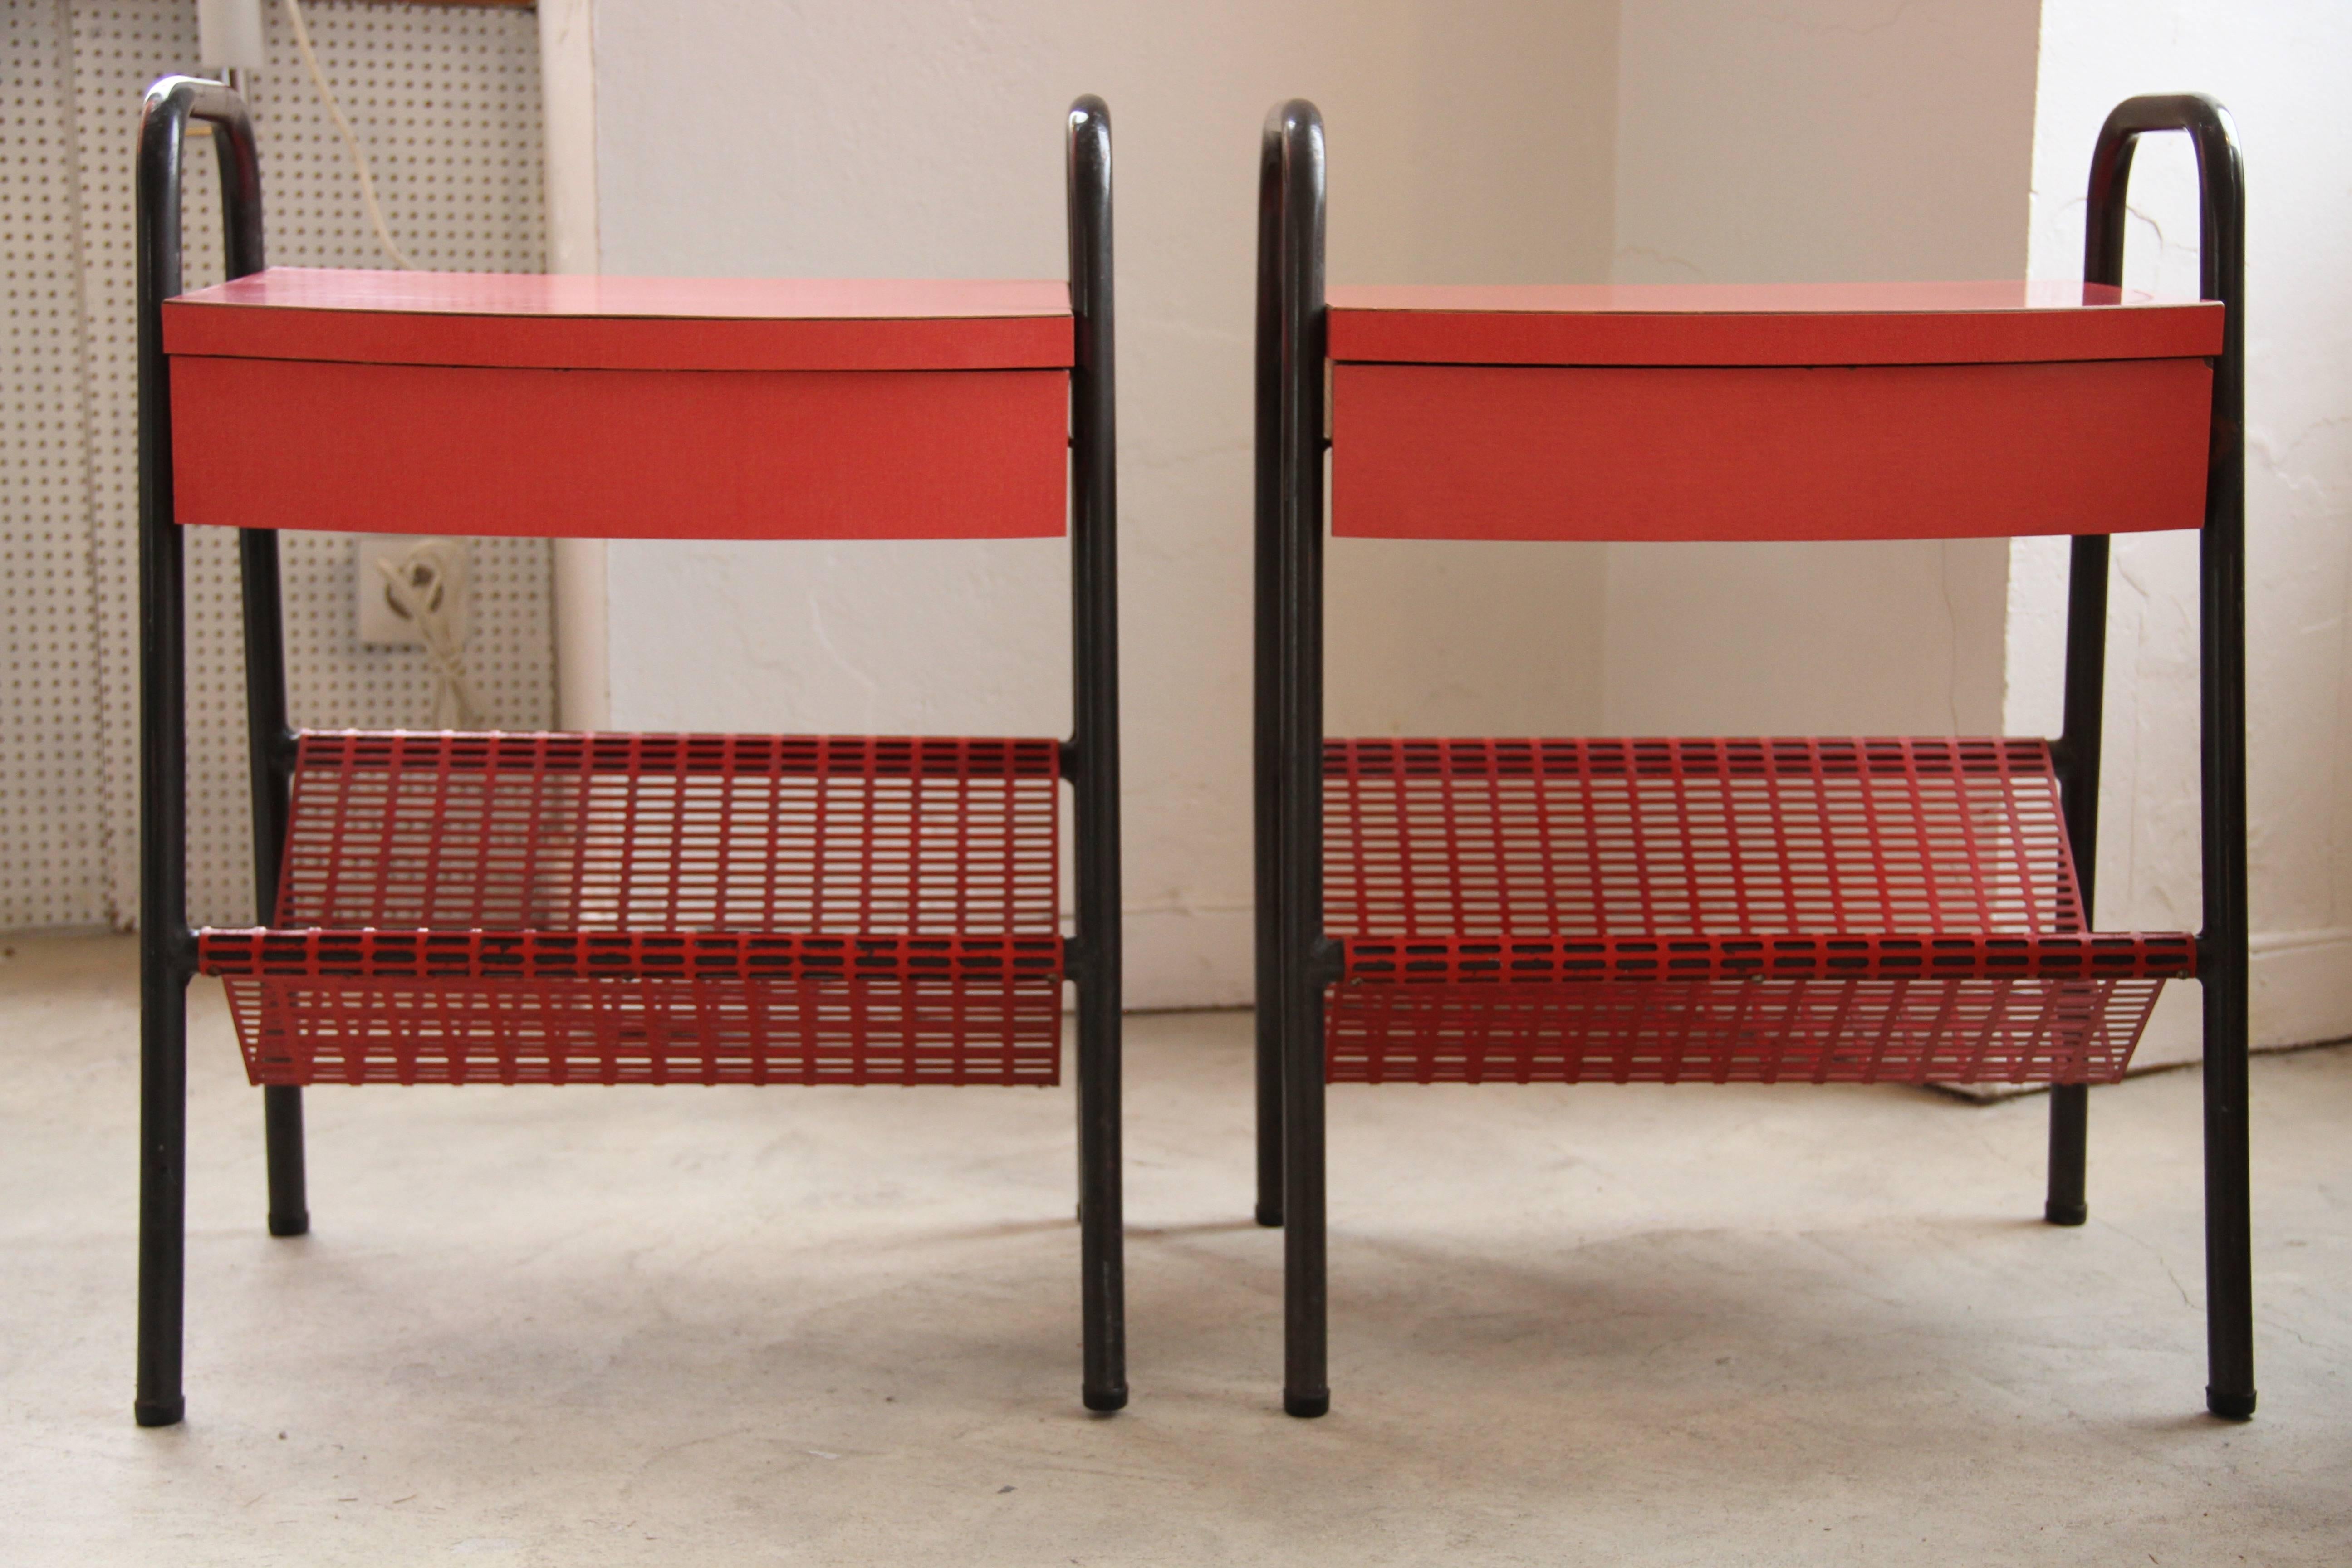 set of 2 nights stands designed by Jacques Hitier 
edited by Tubauto 1953 France

perforated red steel, grey (canon de fusil) enameled steel,
and red Formica

lit: Jacques Hitier, Modernité Industrielle 
de Pierre Gencey, PIQPOQ édition
